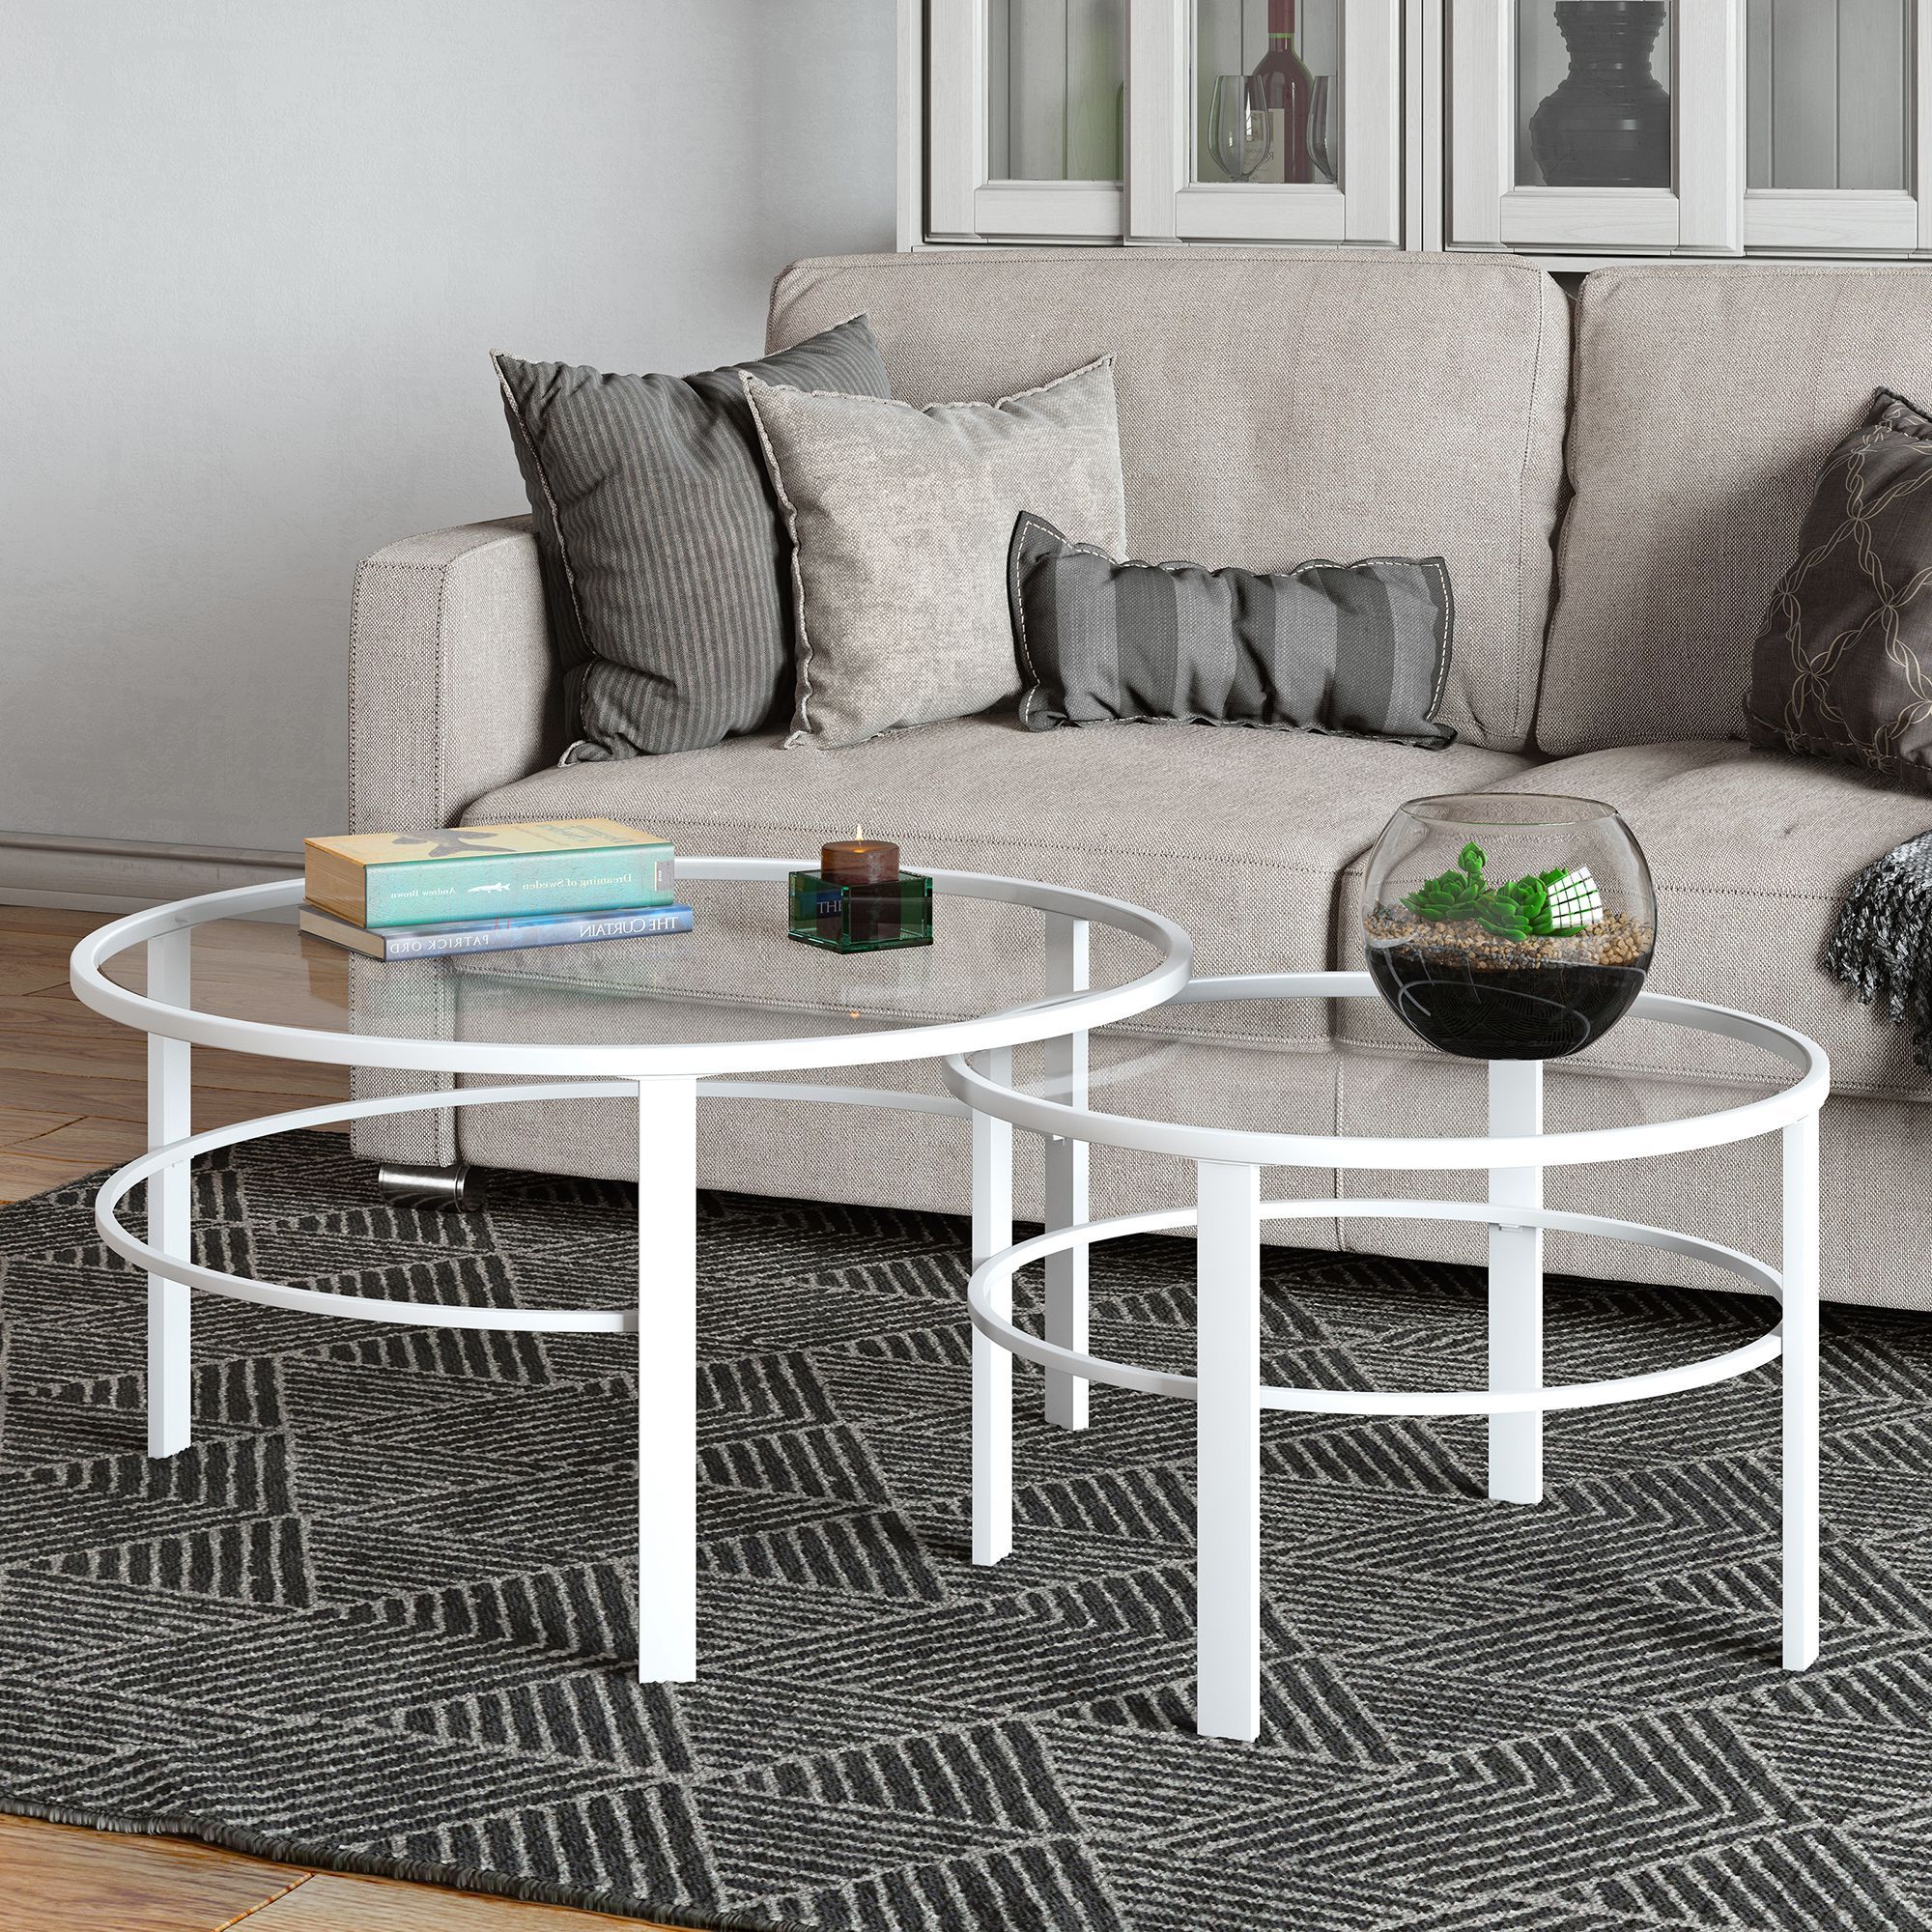 Most Recent Evelyn&zoe Contemporary Nesting Coffee Table Set With With Glass Coffee Tables (View 17 of 20)